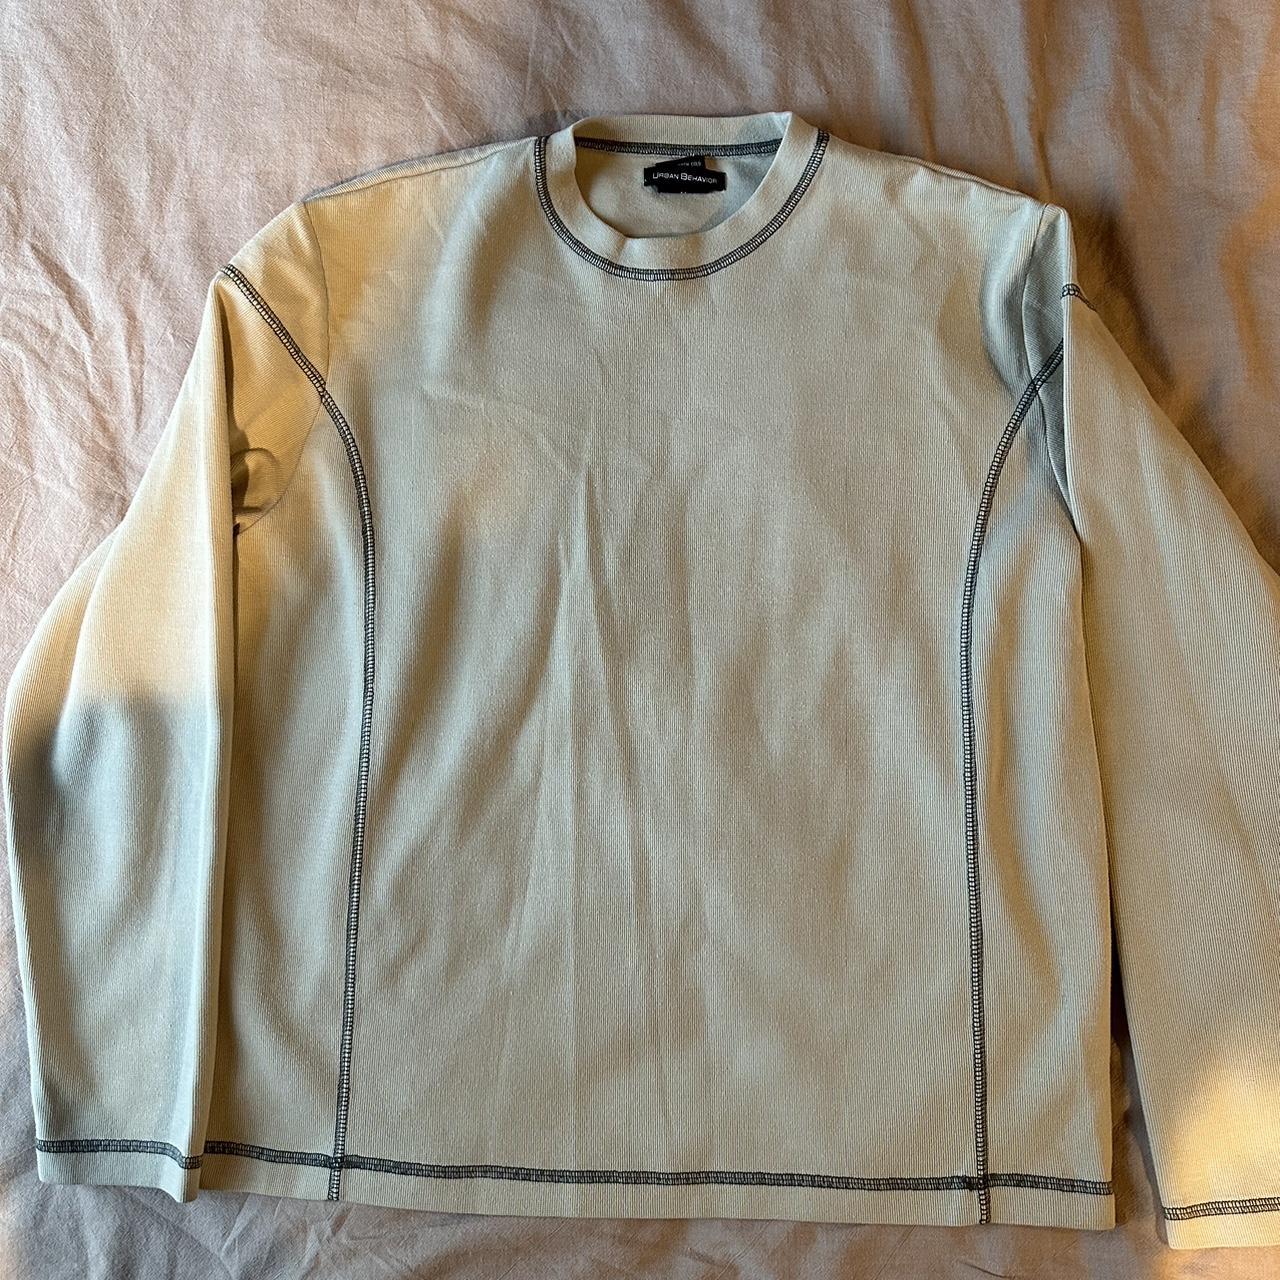 !!!cannot ship this right now!!! Tan/cream colored... - Depop